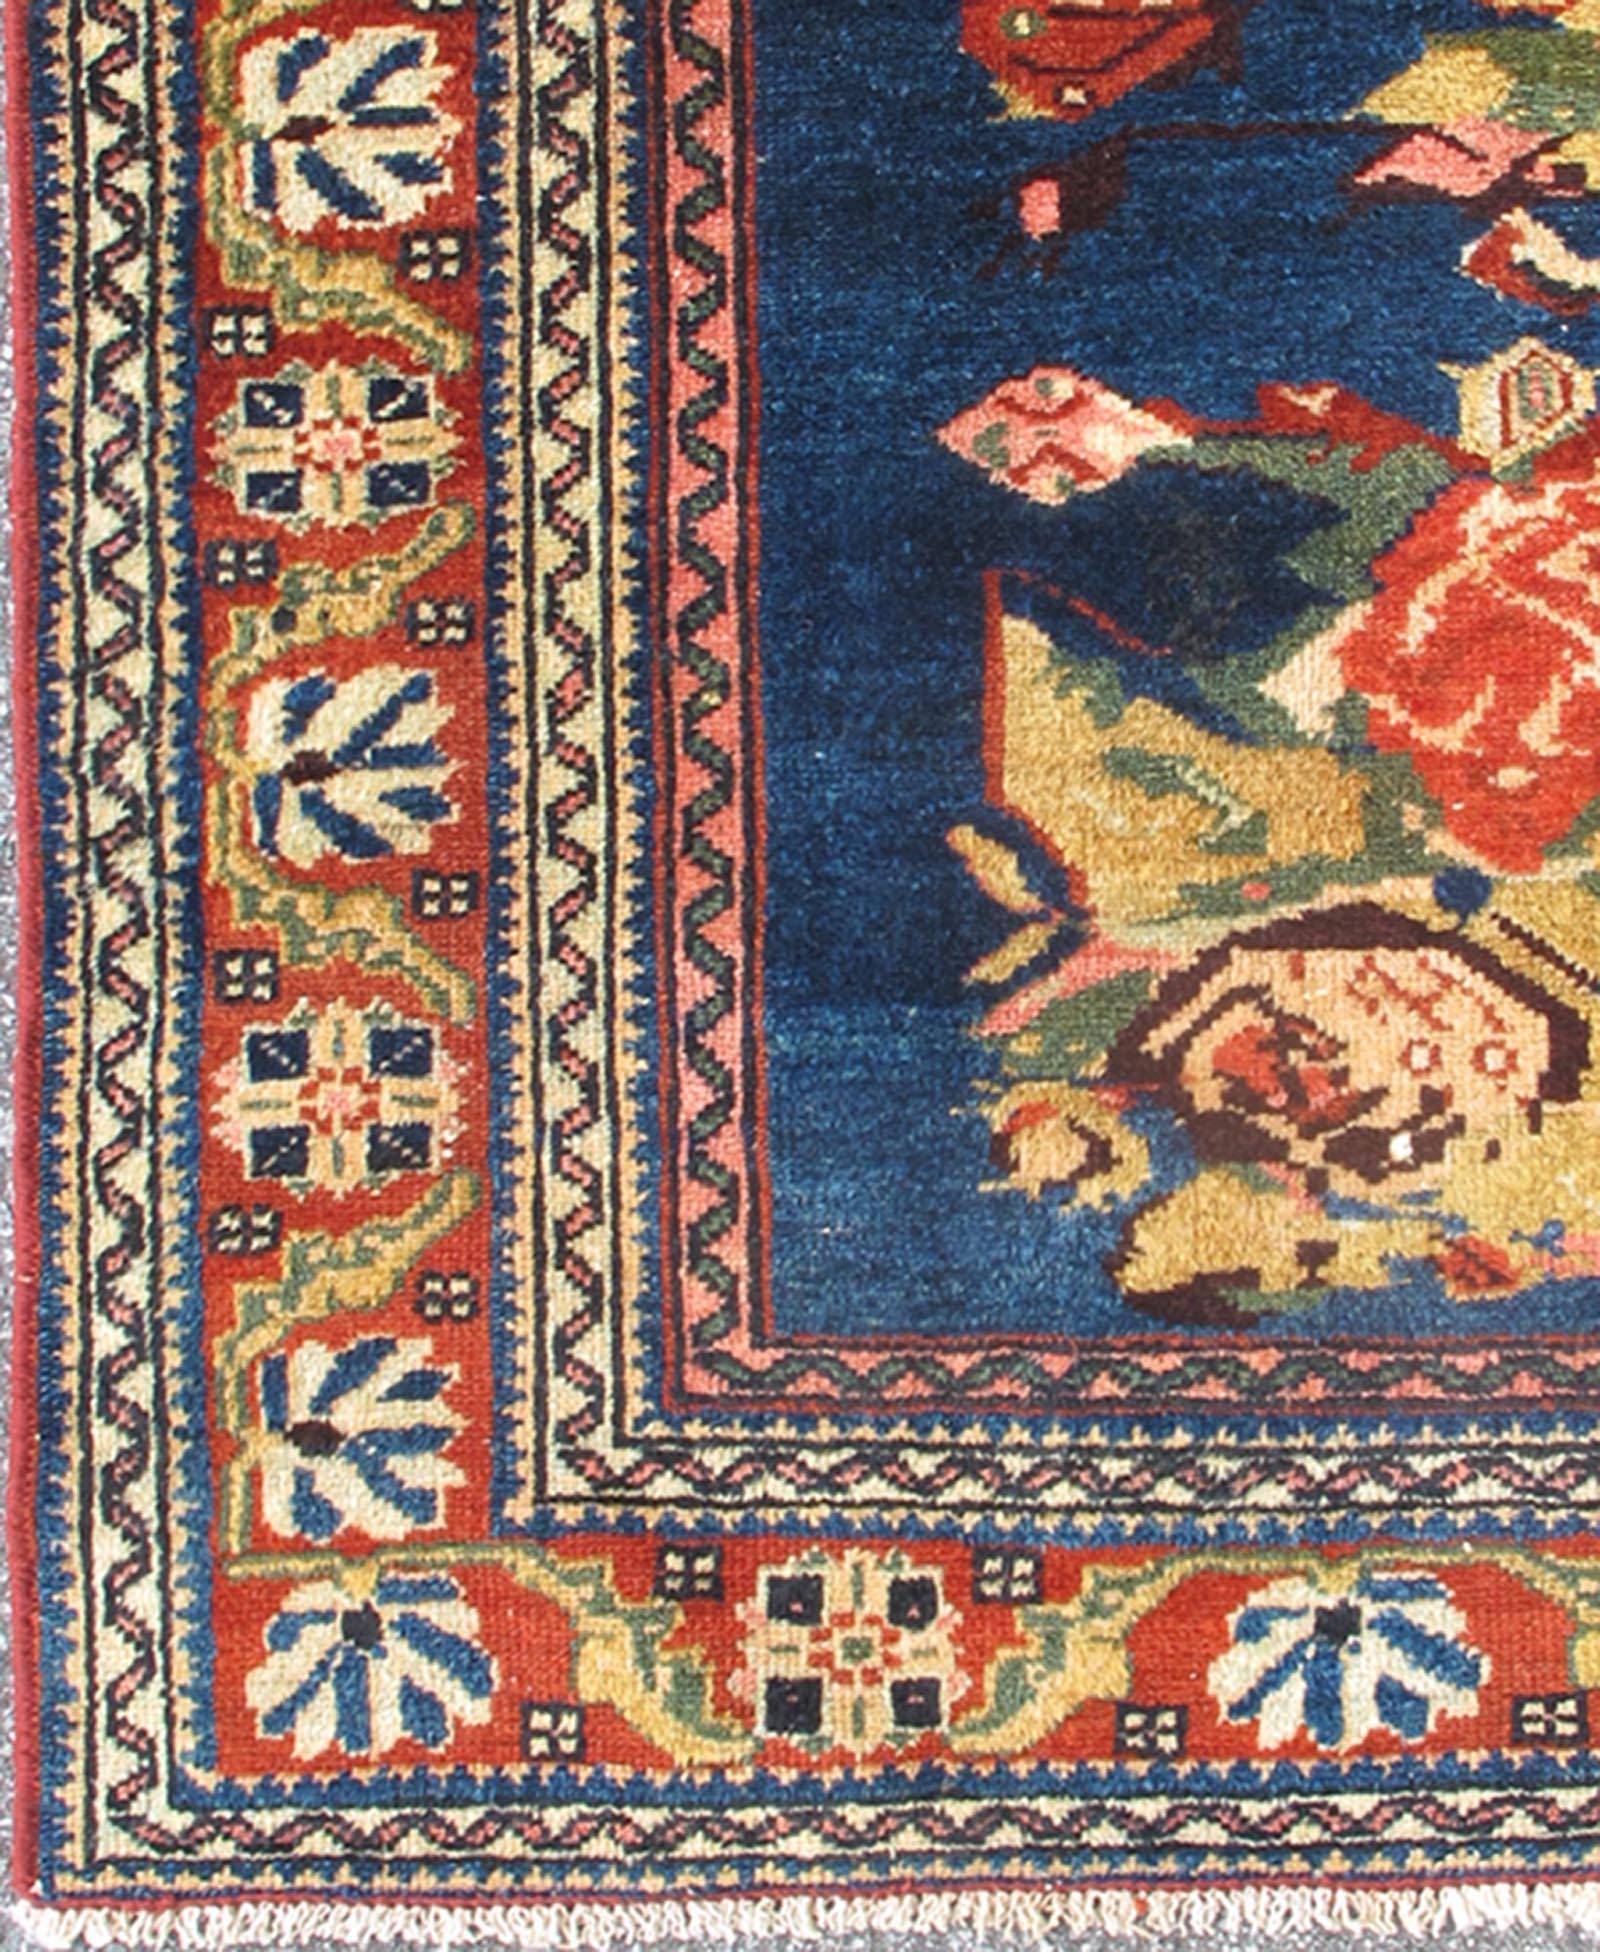 Persian Malayer Carpet with Large Flowers on Deep Blue Field
rug/13-0609, origin/iran

This magnificent antique Persian Malayer carpet bears a beautiful, all-over floral design paired with a delightful palette of various shades of deep blue, red,